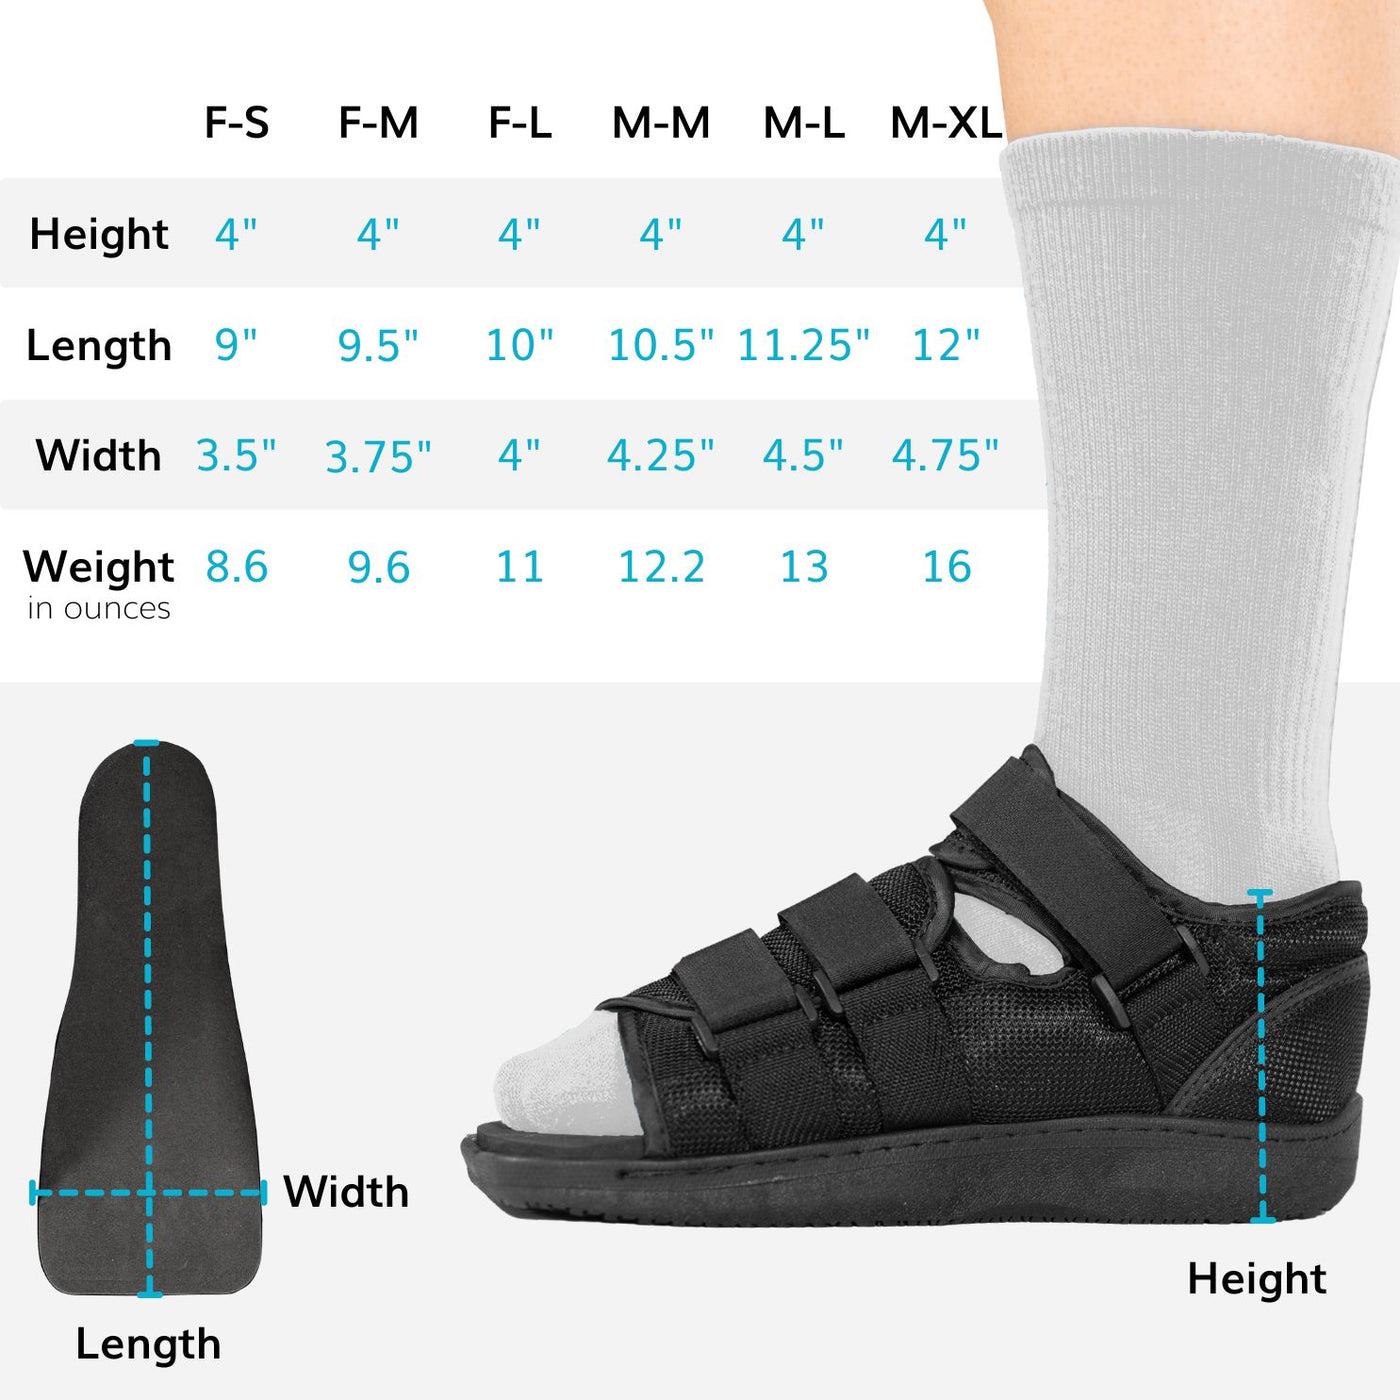 The post op, broken foot and toe fracture shoe comes in six variations with different widths and lengths